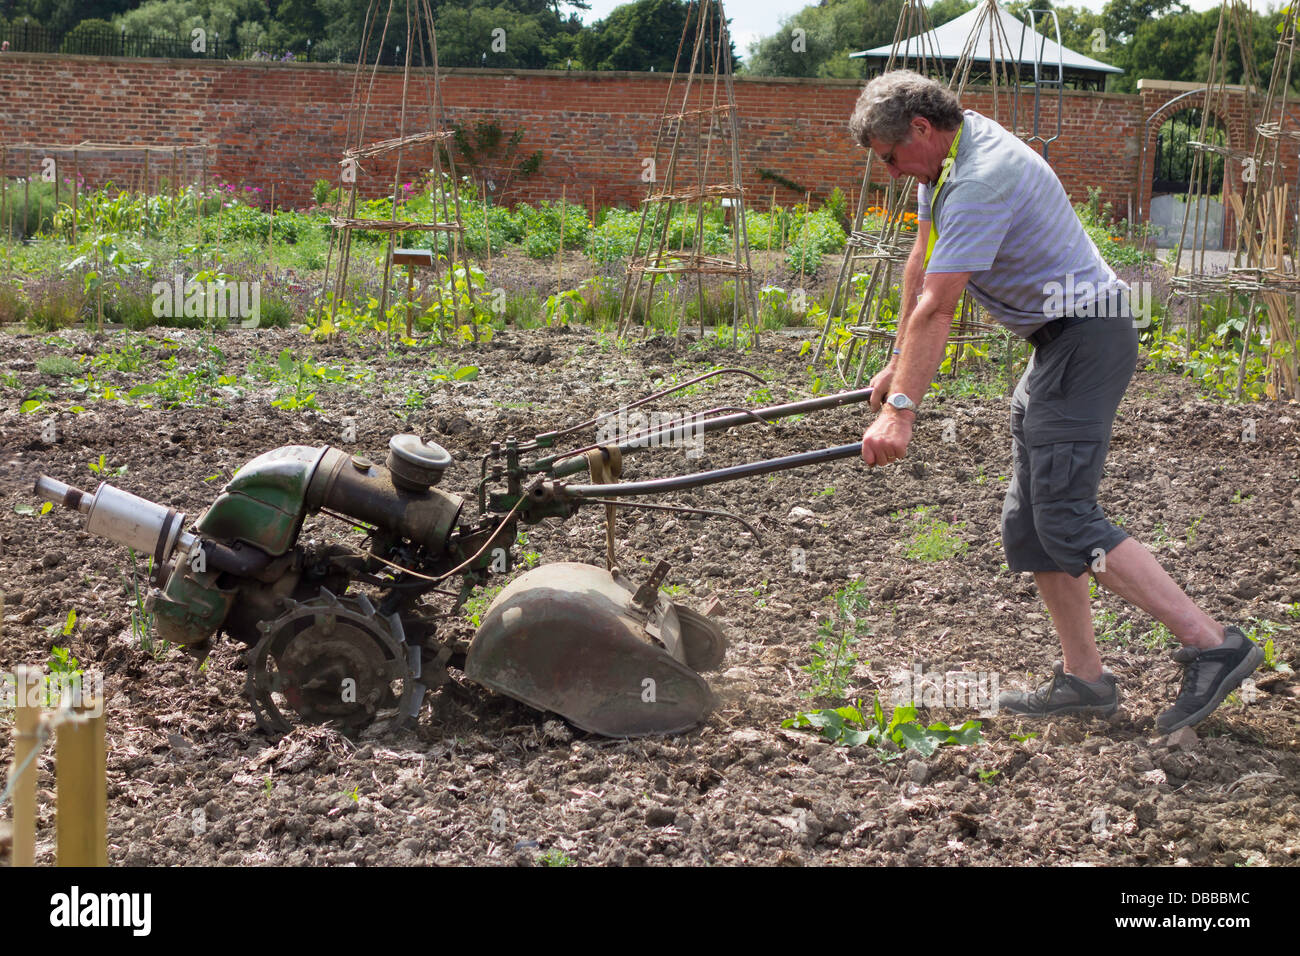 Gardener in a heritage walled garden pressing down hard on the handles of a vintage Rotavator Stock Photo